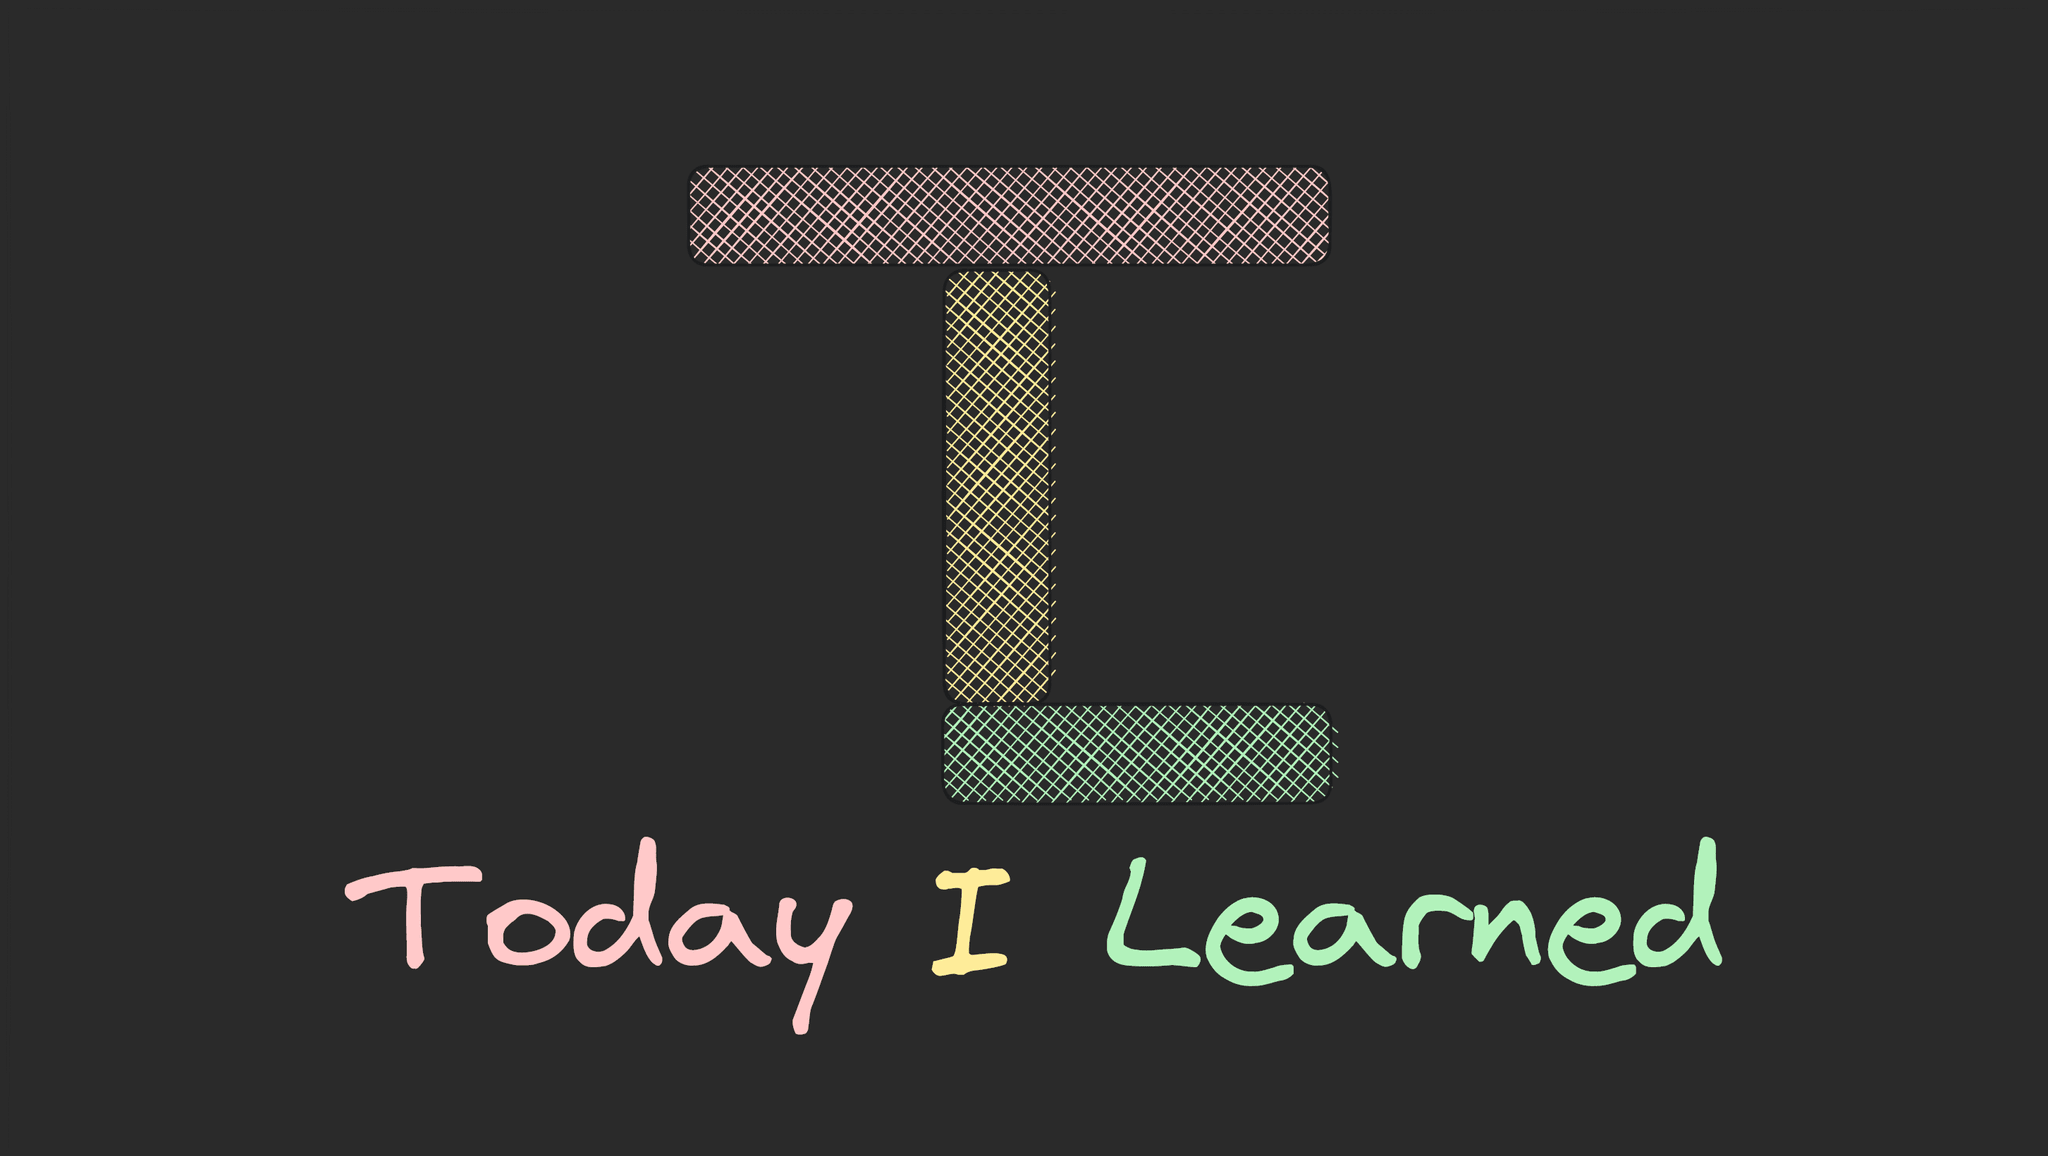 An image containing the text, "Today I Learned", with some rectangles forming the text "TIL".